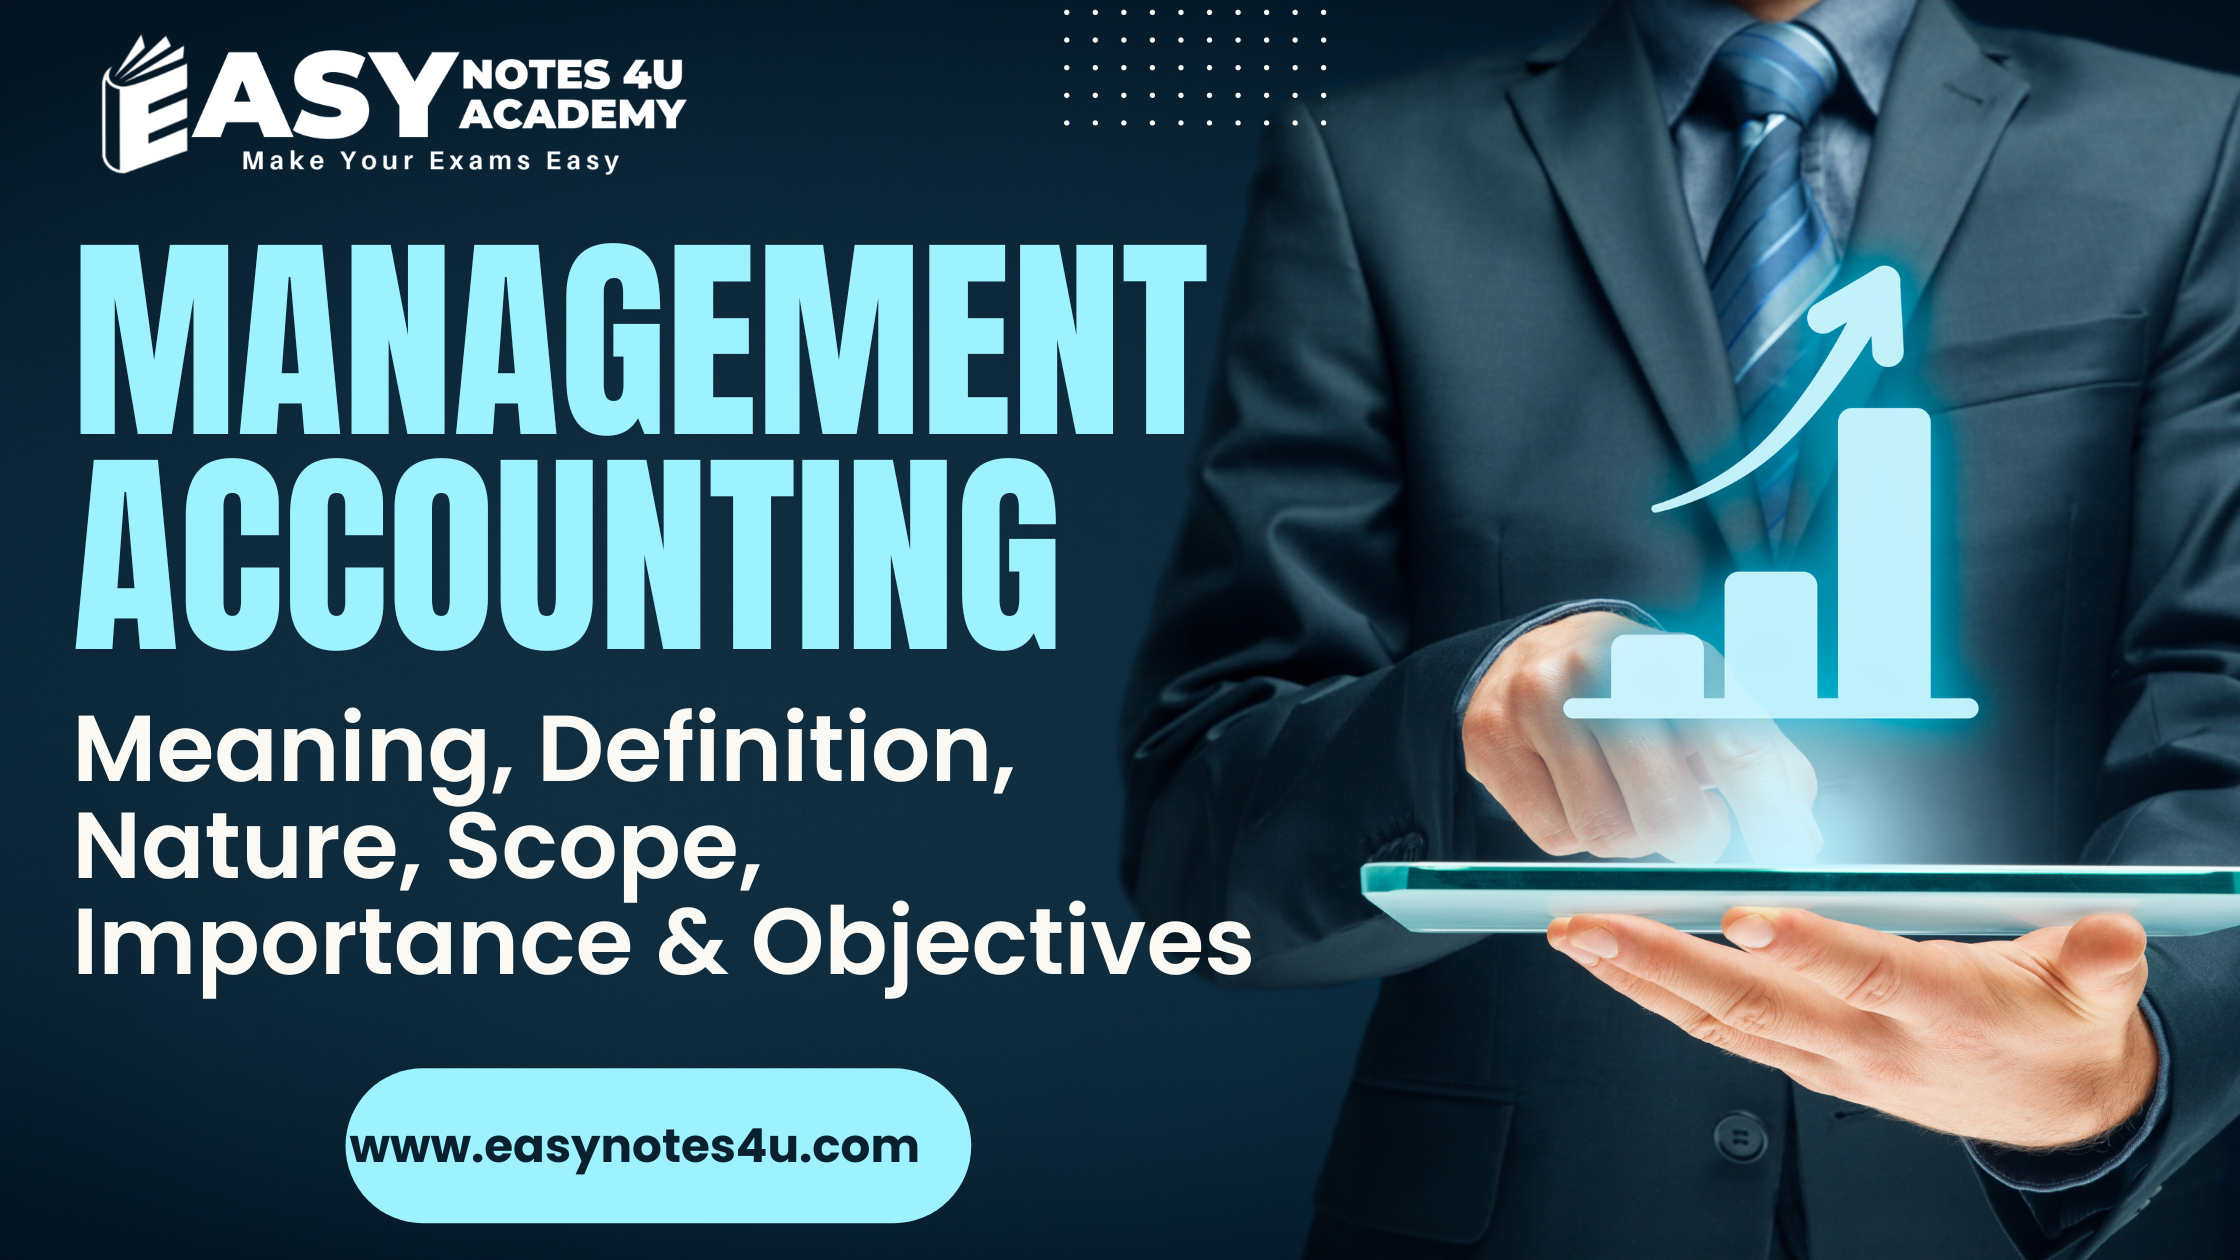 meaning, definition, Nature or Characteristics, Objectives, Importance, and scope of Management Accounting.